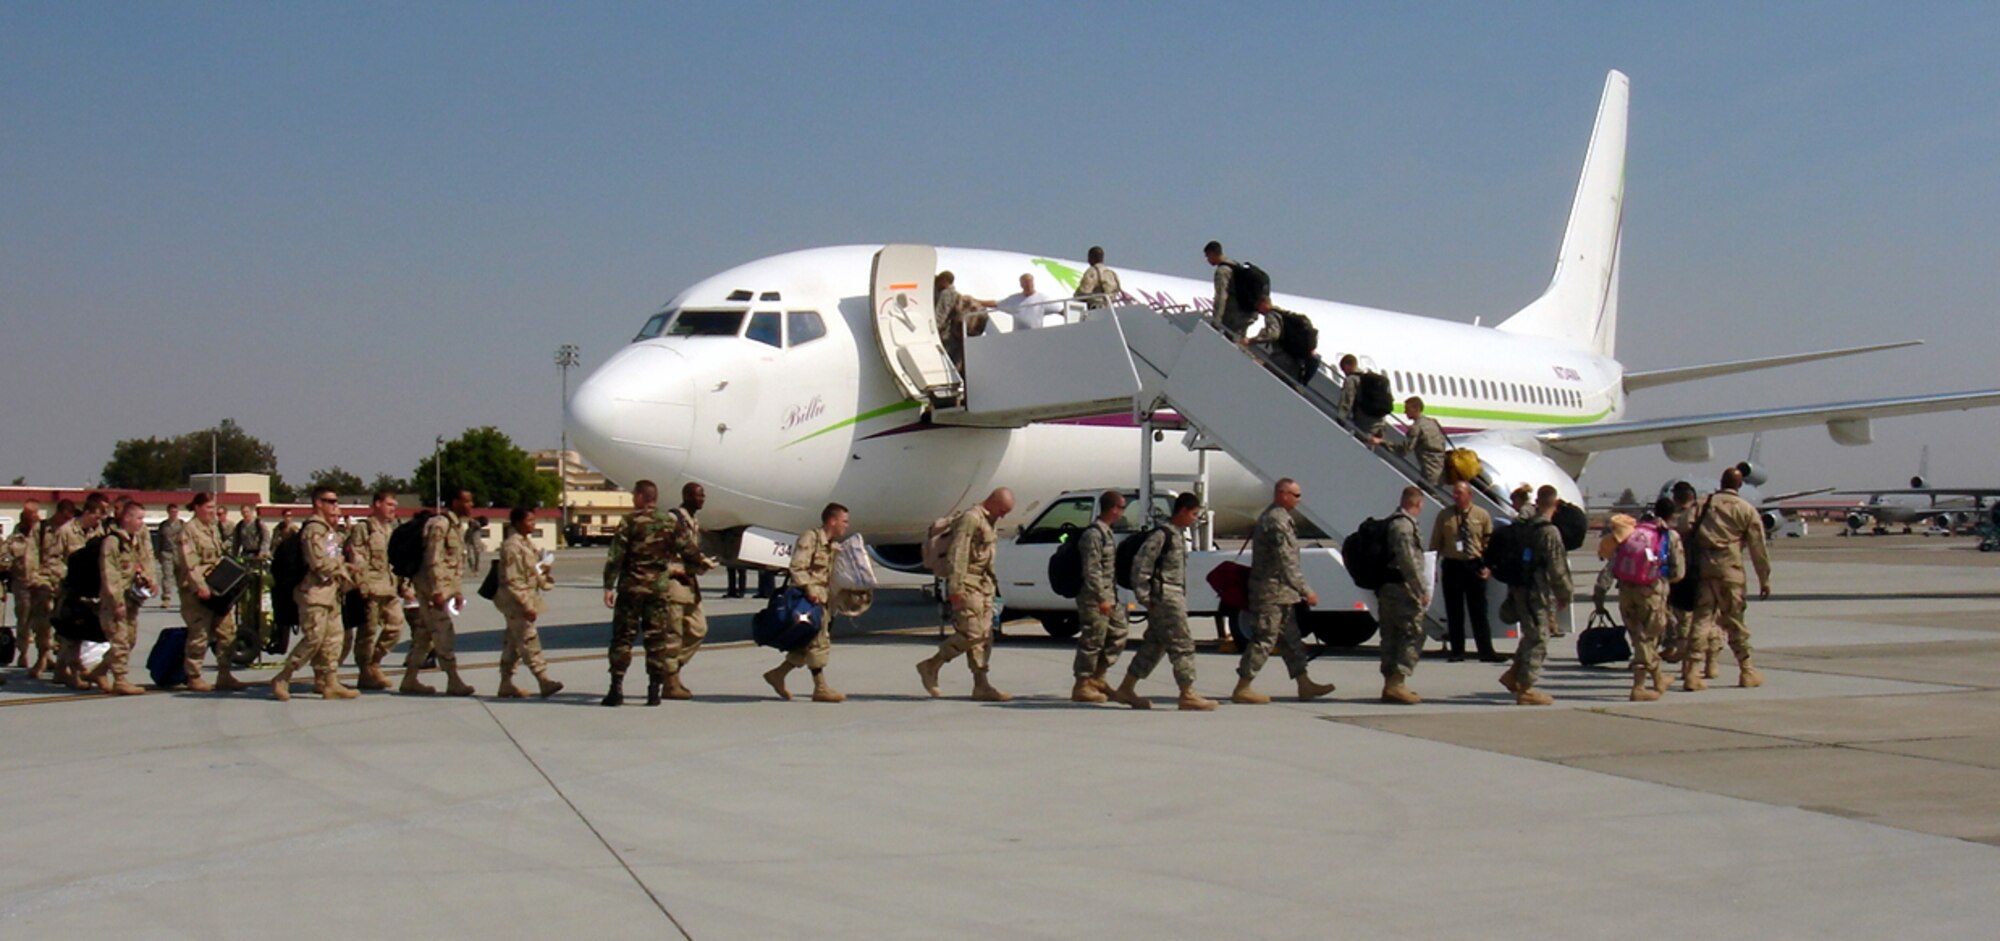 Members of the 60th Aerial Port Squadron prepare to deploy to Southwest Asia. The deployment marks Team Travis’ continued support of the war effort. (U.S. Air Force photo)

